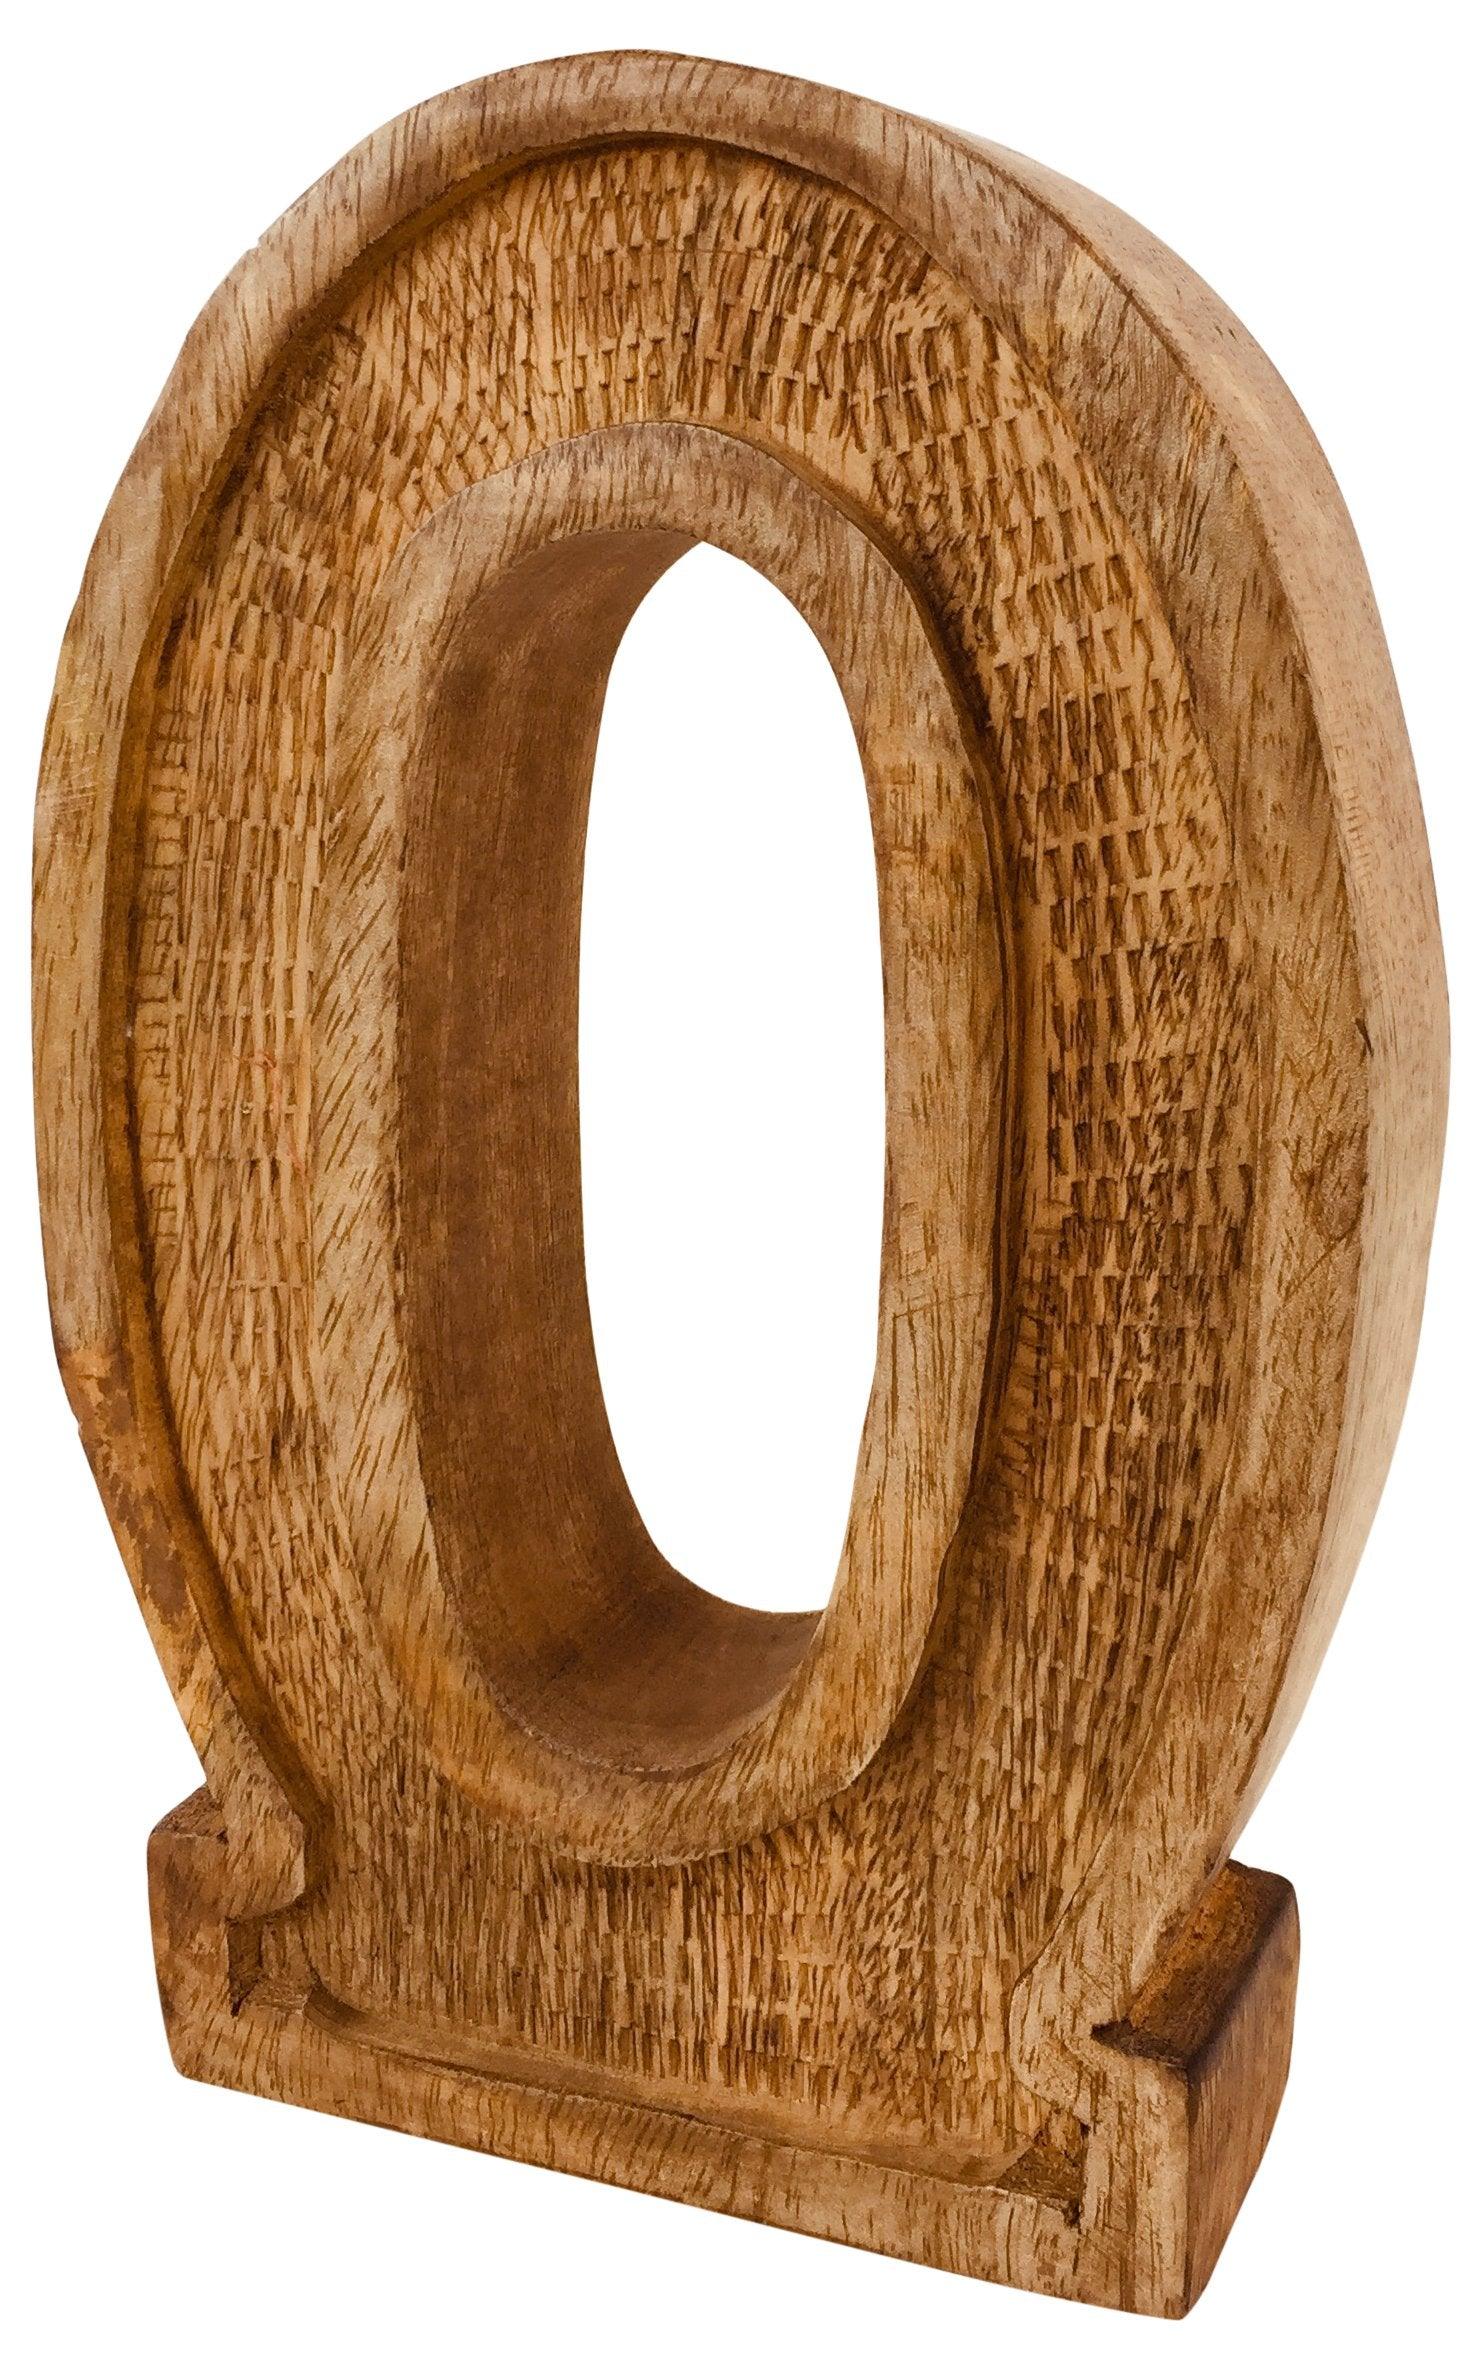 Hand Carved Wooden Embossed Letter O - £18.99 - Single Letters 